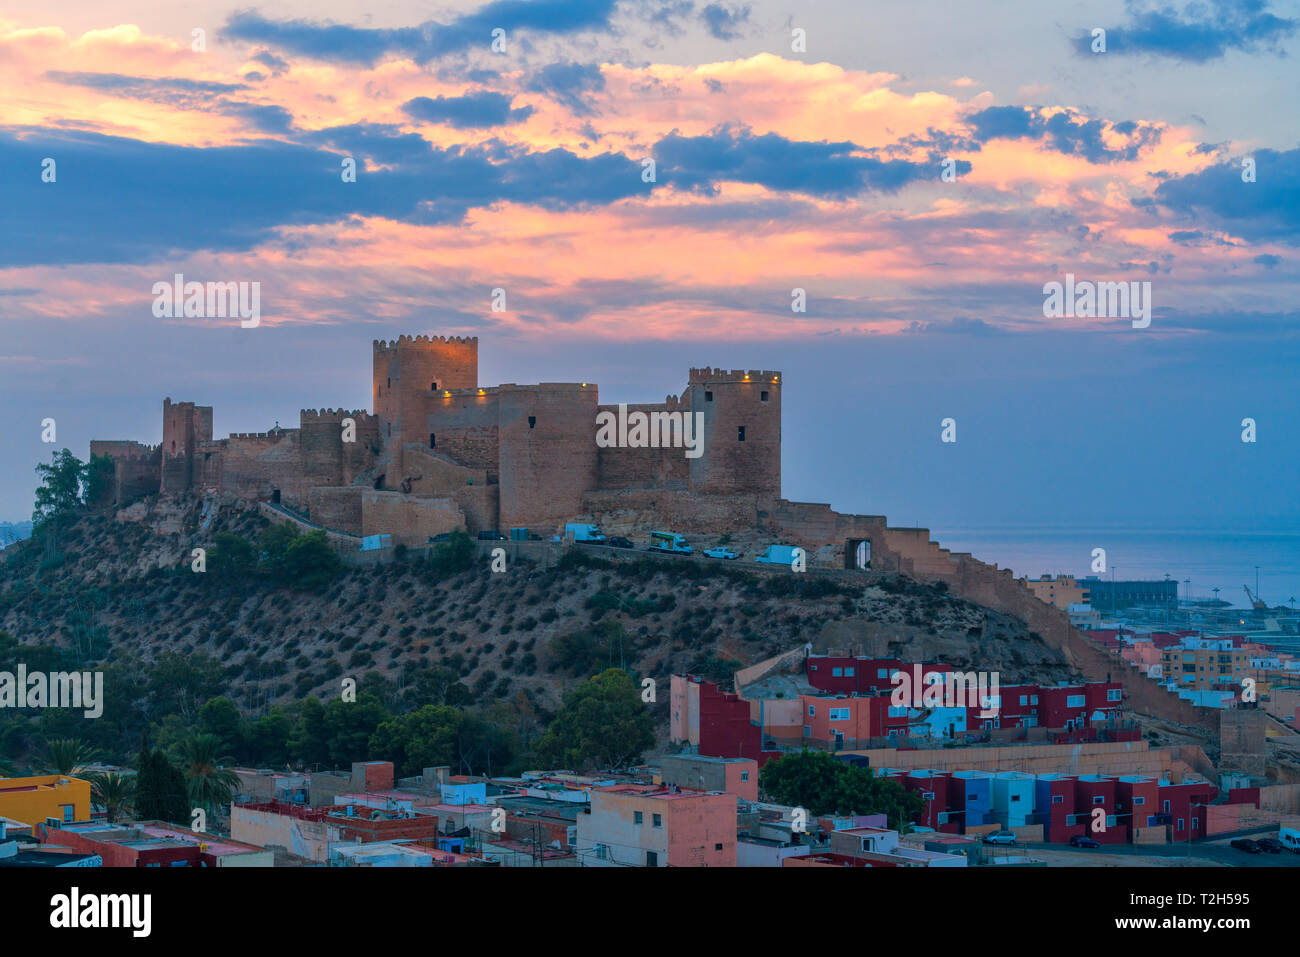 The Alcazaba old Moorish castle and fortress on hilltop at sunrise, Almeria, Andalusia, Spain Stock Photo